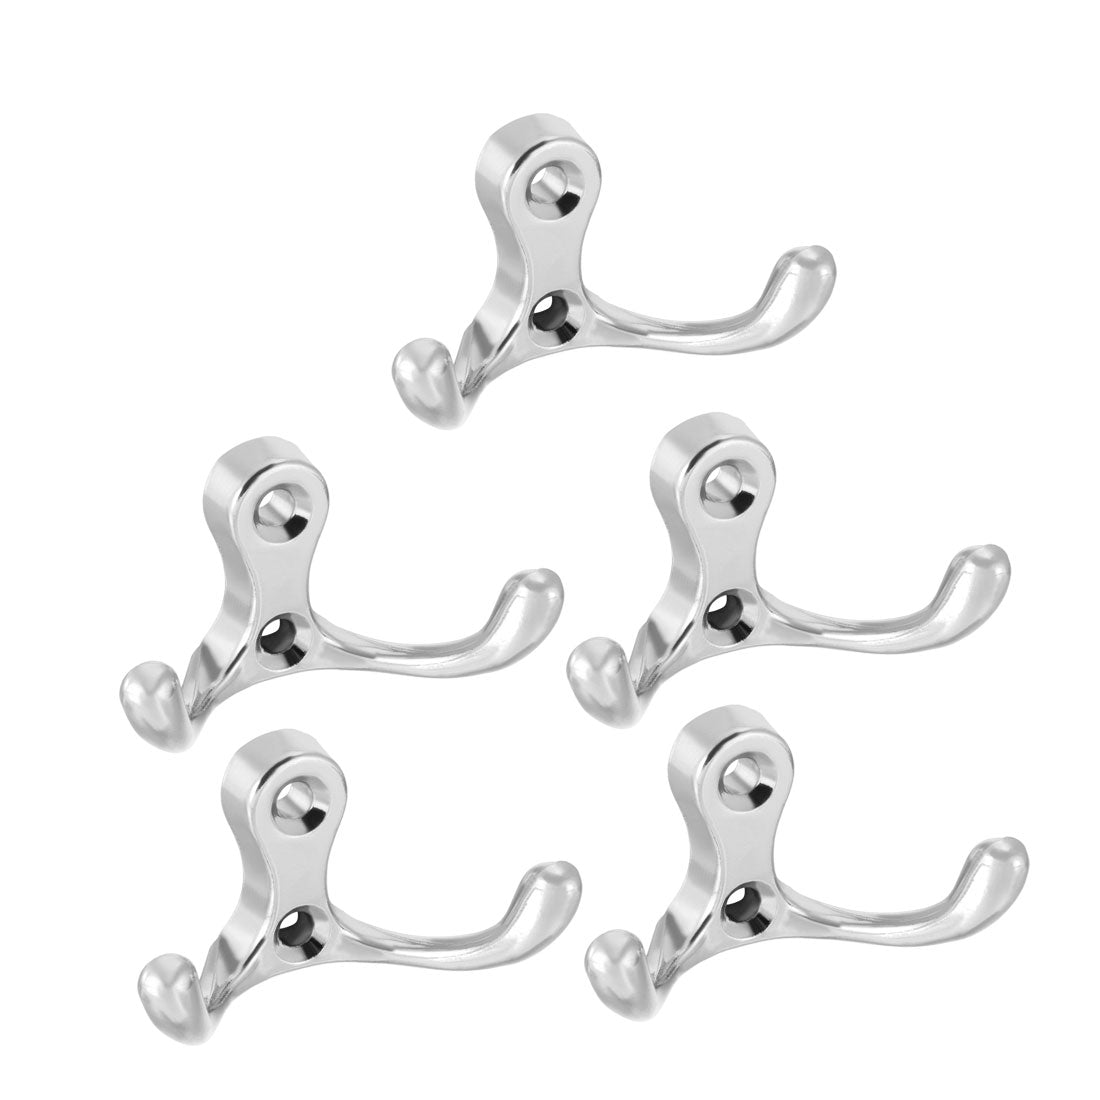 uxcell Uxcell Dual Prong Coat Hooks Wall Mounted Retro Double Hooks Utility Silver Hook for Coat Scarf Bag Towel Key Cap Cup Hat 30mm x 55mm x 29mm 5pcs